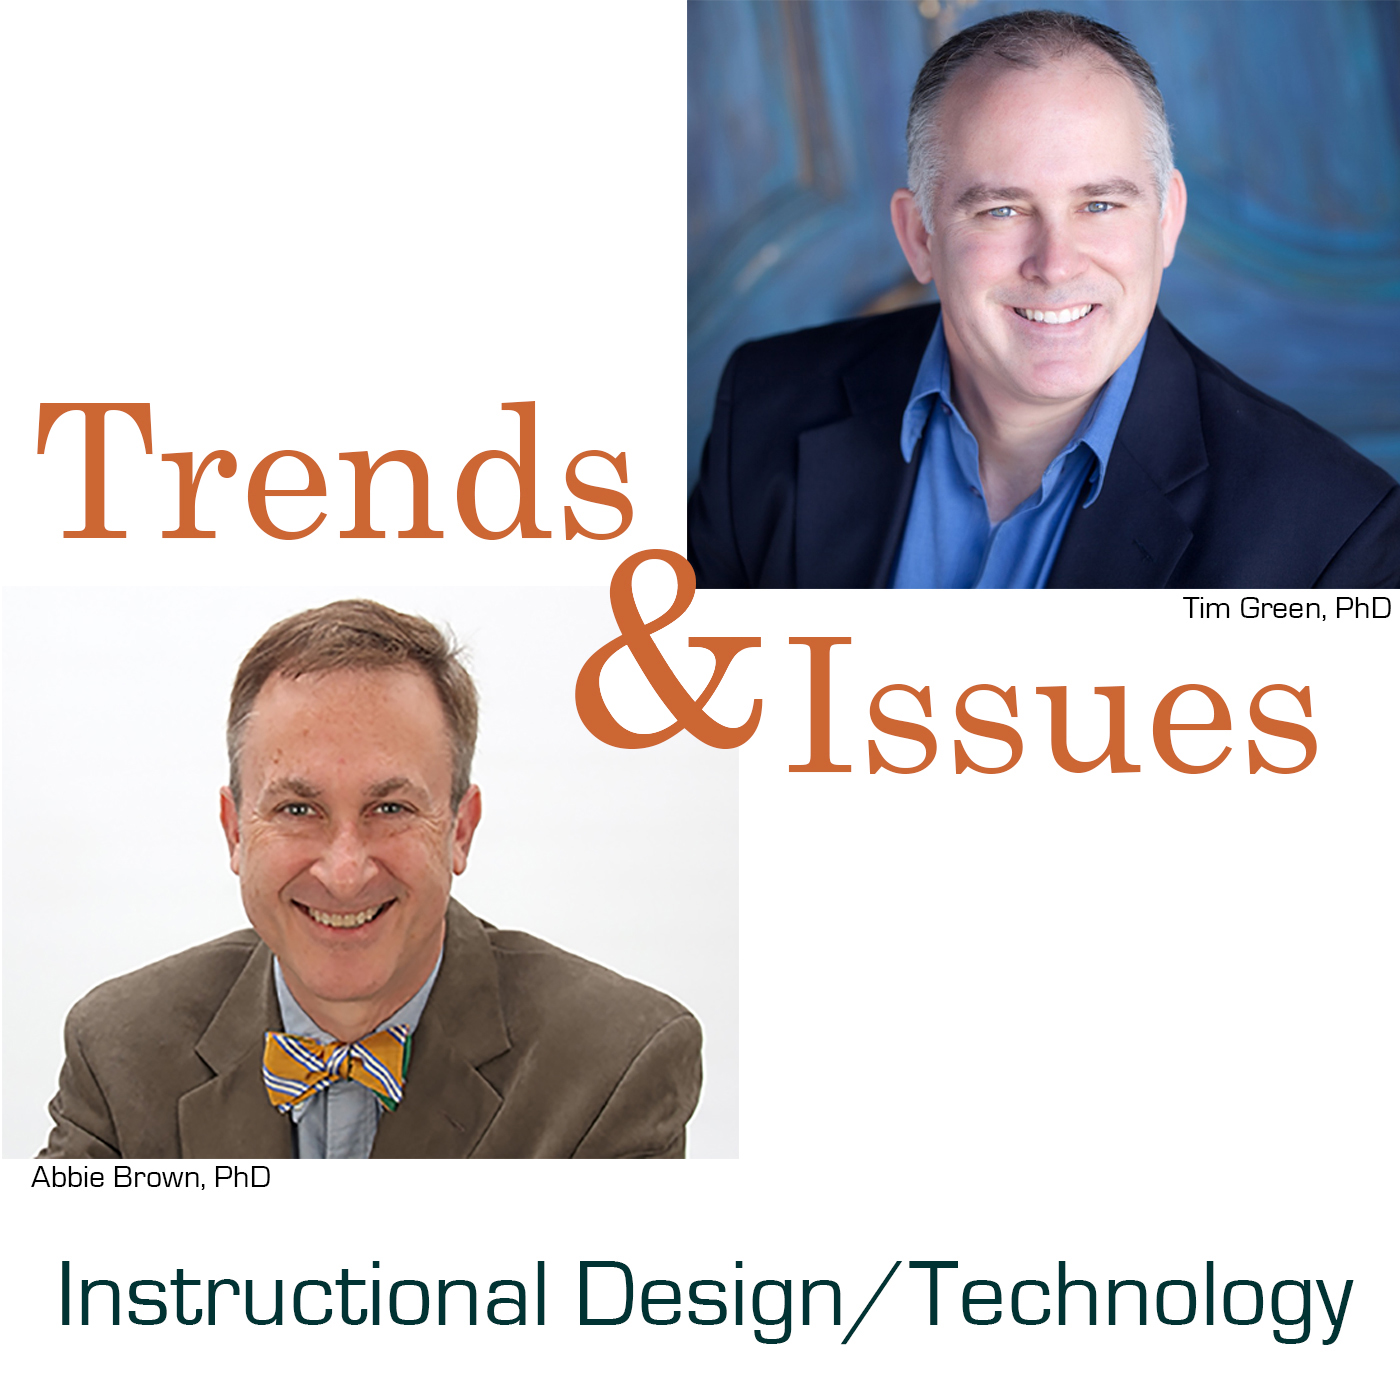 A highlight from Episode 196 Trends for October 8-21, 2021: Digital Citizenship & Safety, Teaching & Instructional Design, Hardware & Software, and Reflections on Remote Teaching & Learning